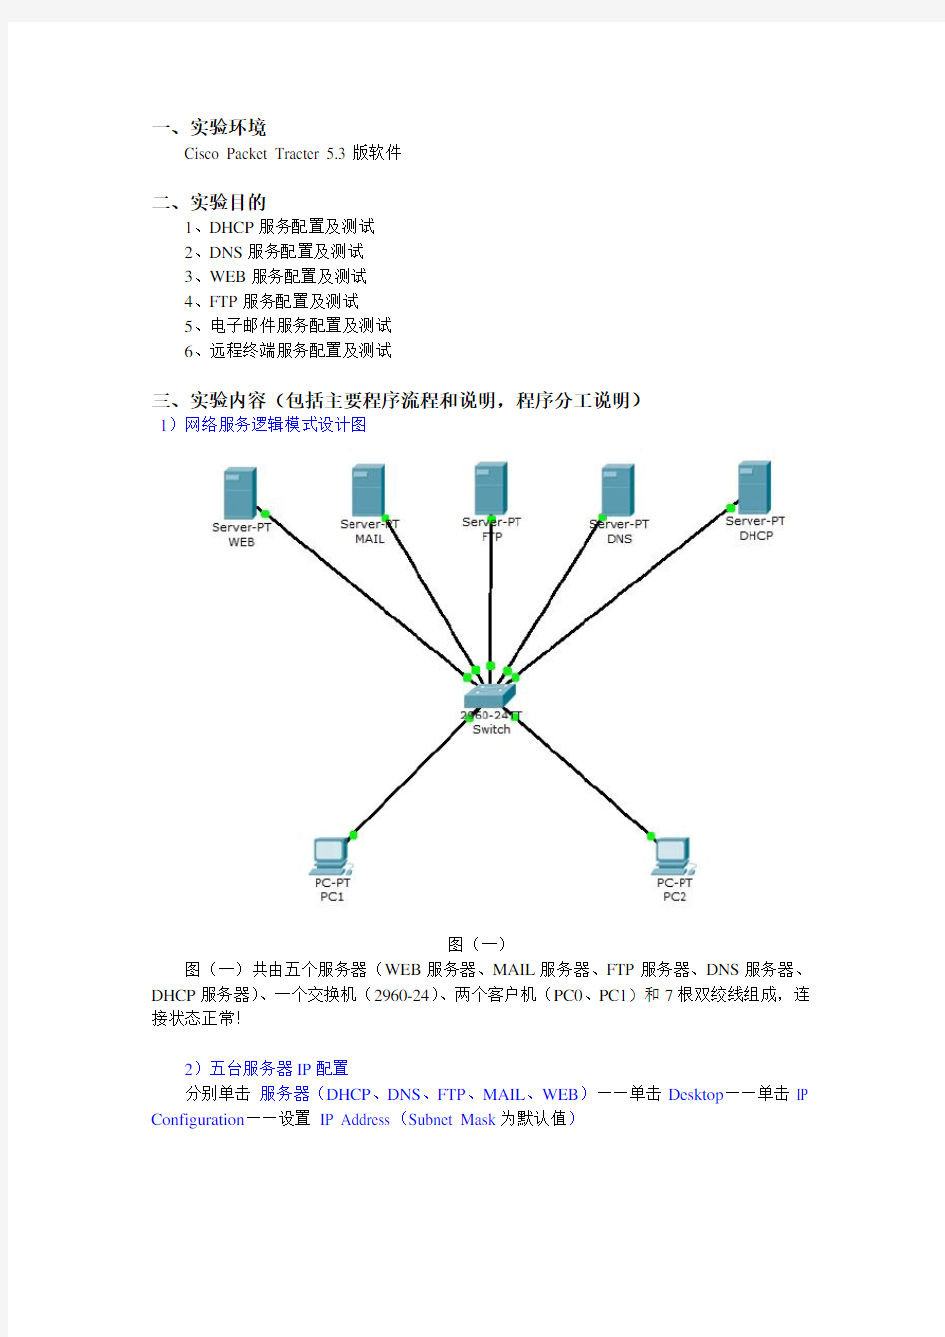 Cisco Packet Tracer服务器配置_邮件传送_ftp_web_email_dns_dhcp图解